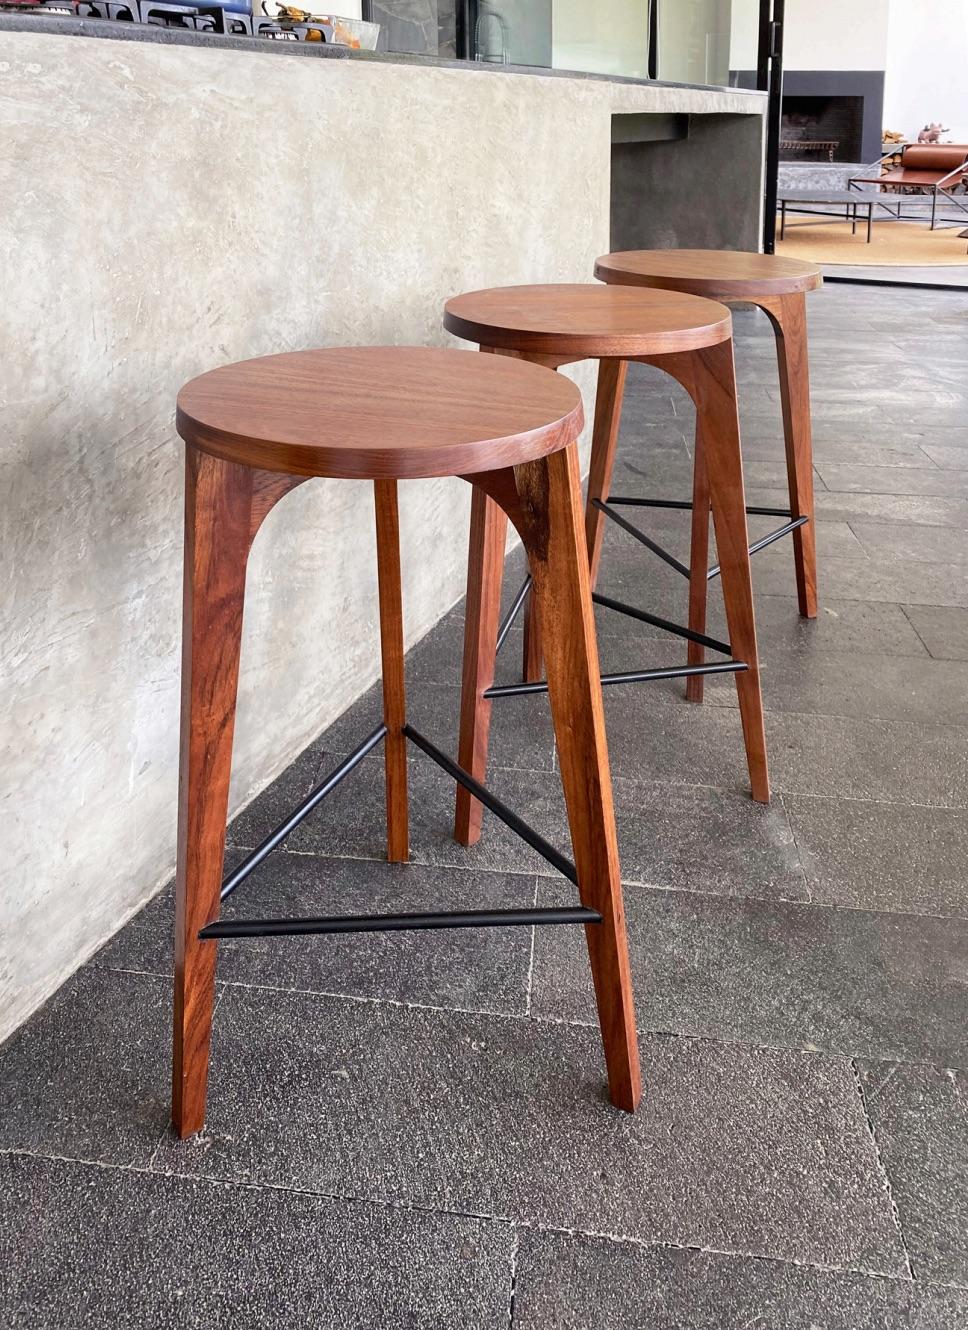 Tripie is a contemporary stool design made of solid Tzalam wood and steel structure, in size 35 x 64 cm.



Tripie is available in multiple dimensions and materials:

Types of wood: Solid Spring Wood / Parota / Tzalam / Ash / Oak / Walnut /